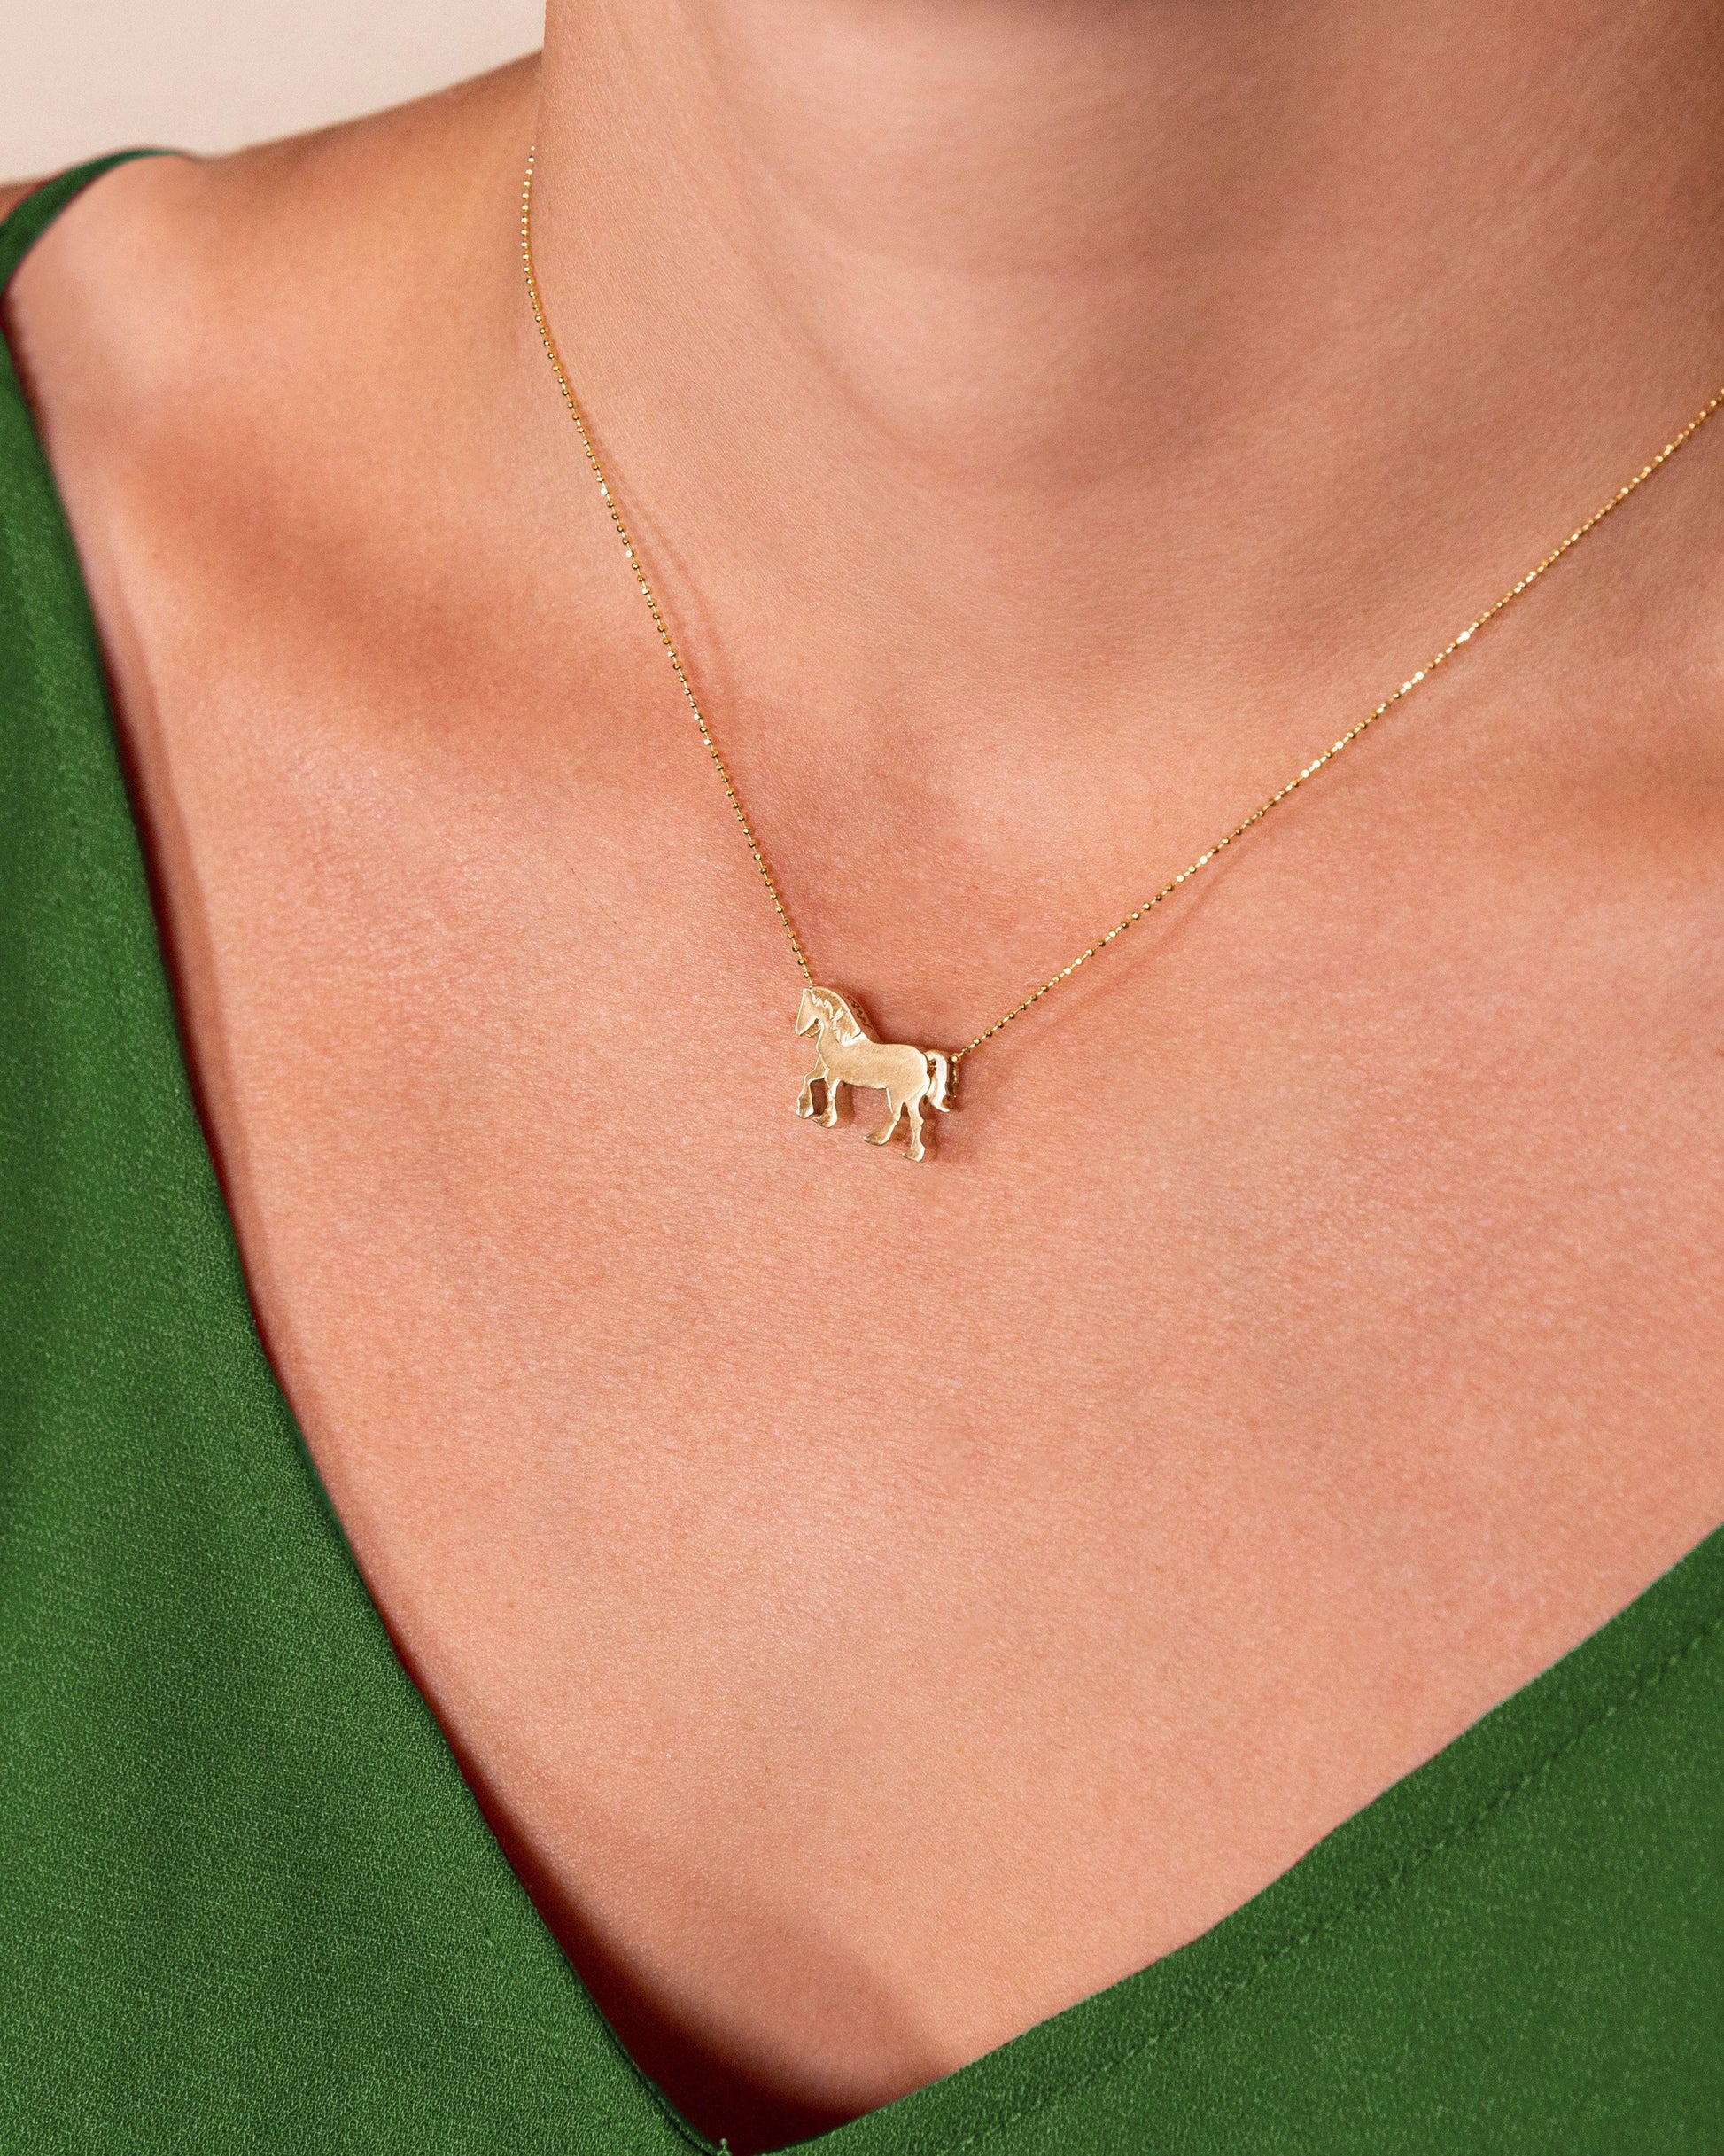 women wearing 14 carat gold clydesdale necklace,